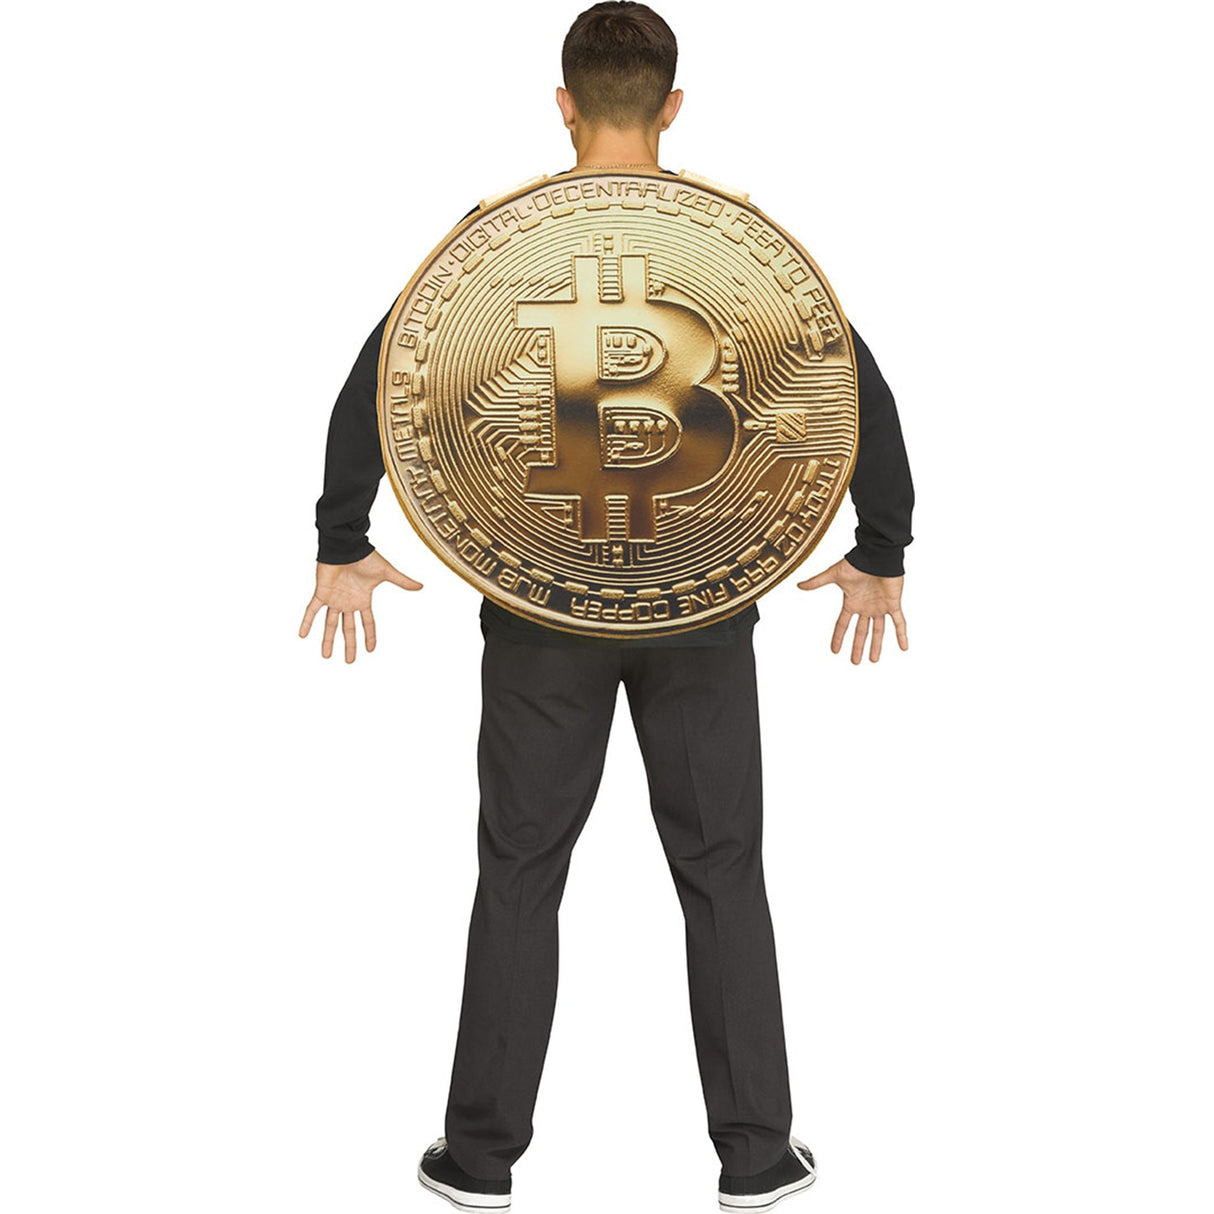 FUN WORLD Costumes Bitcoin Costume for Adults 071765143071